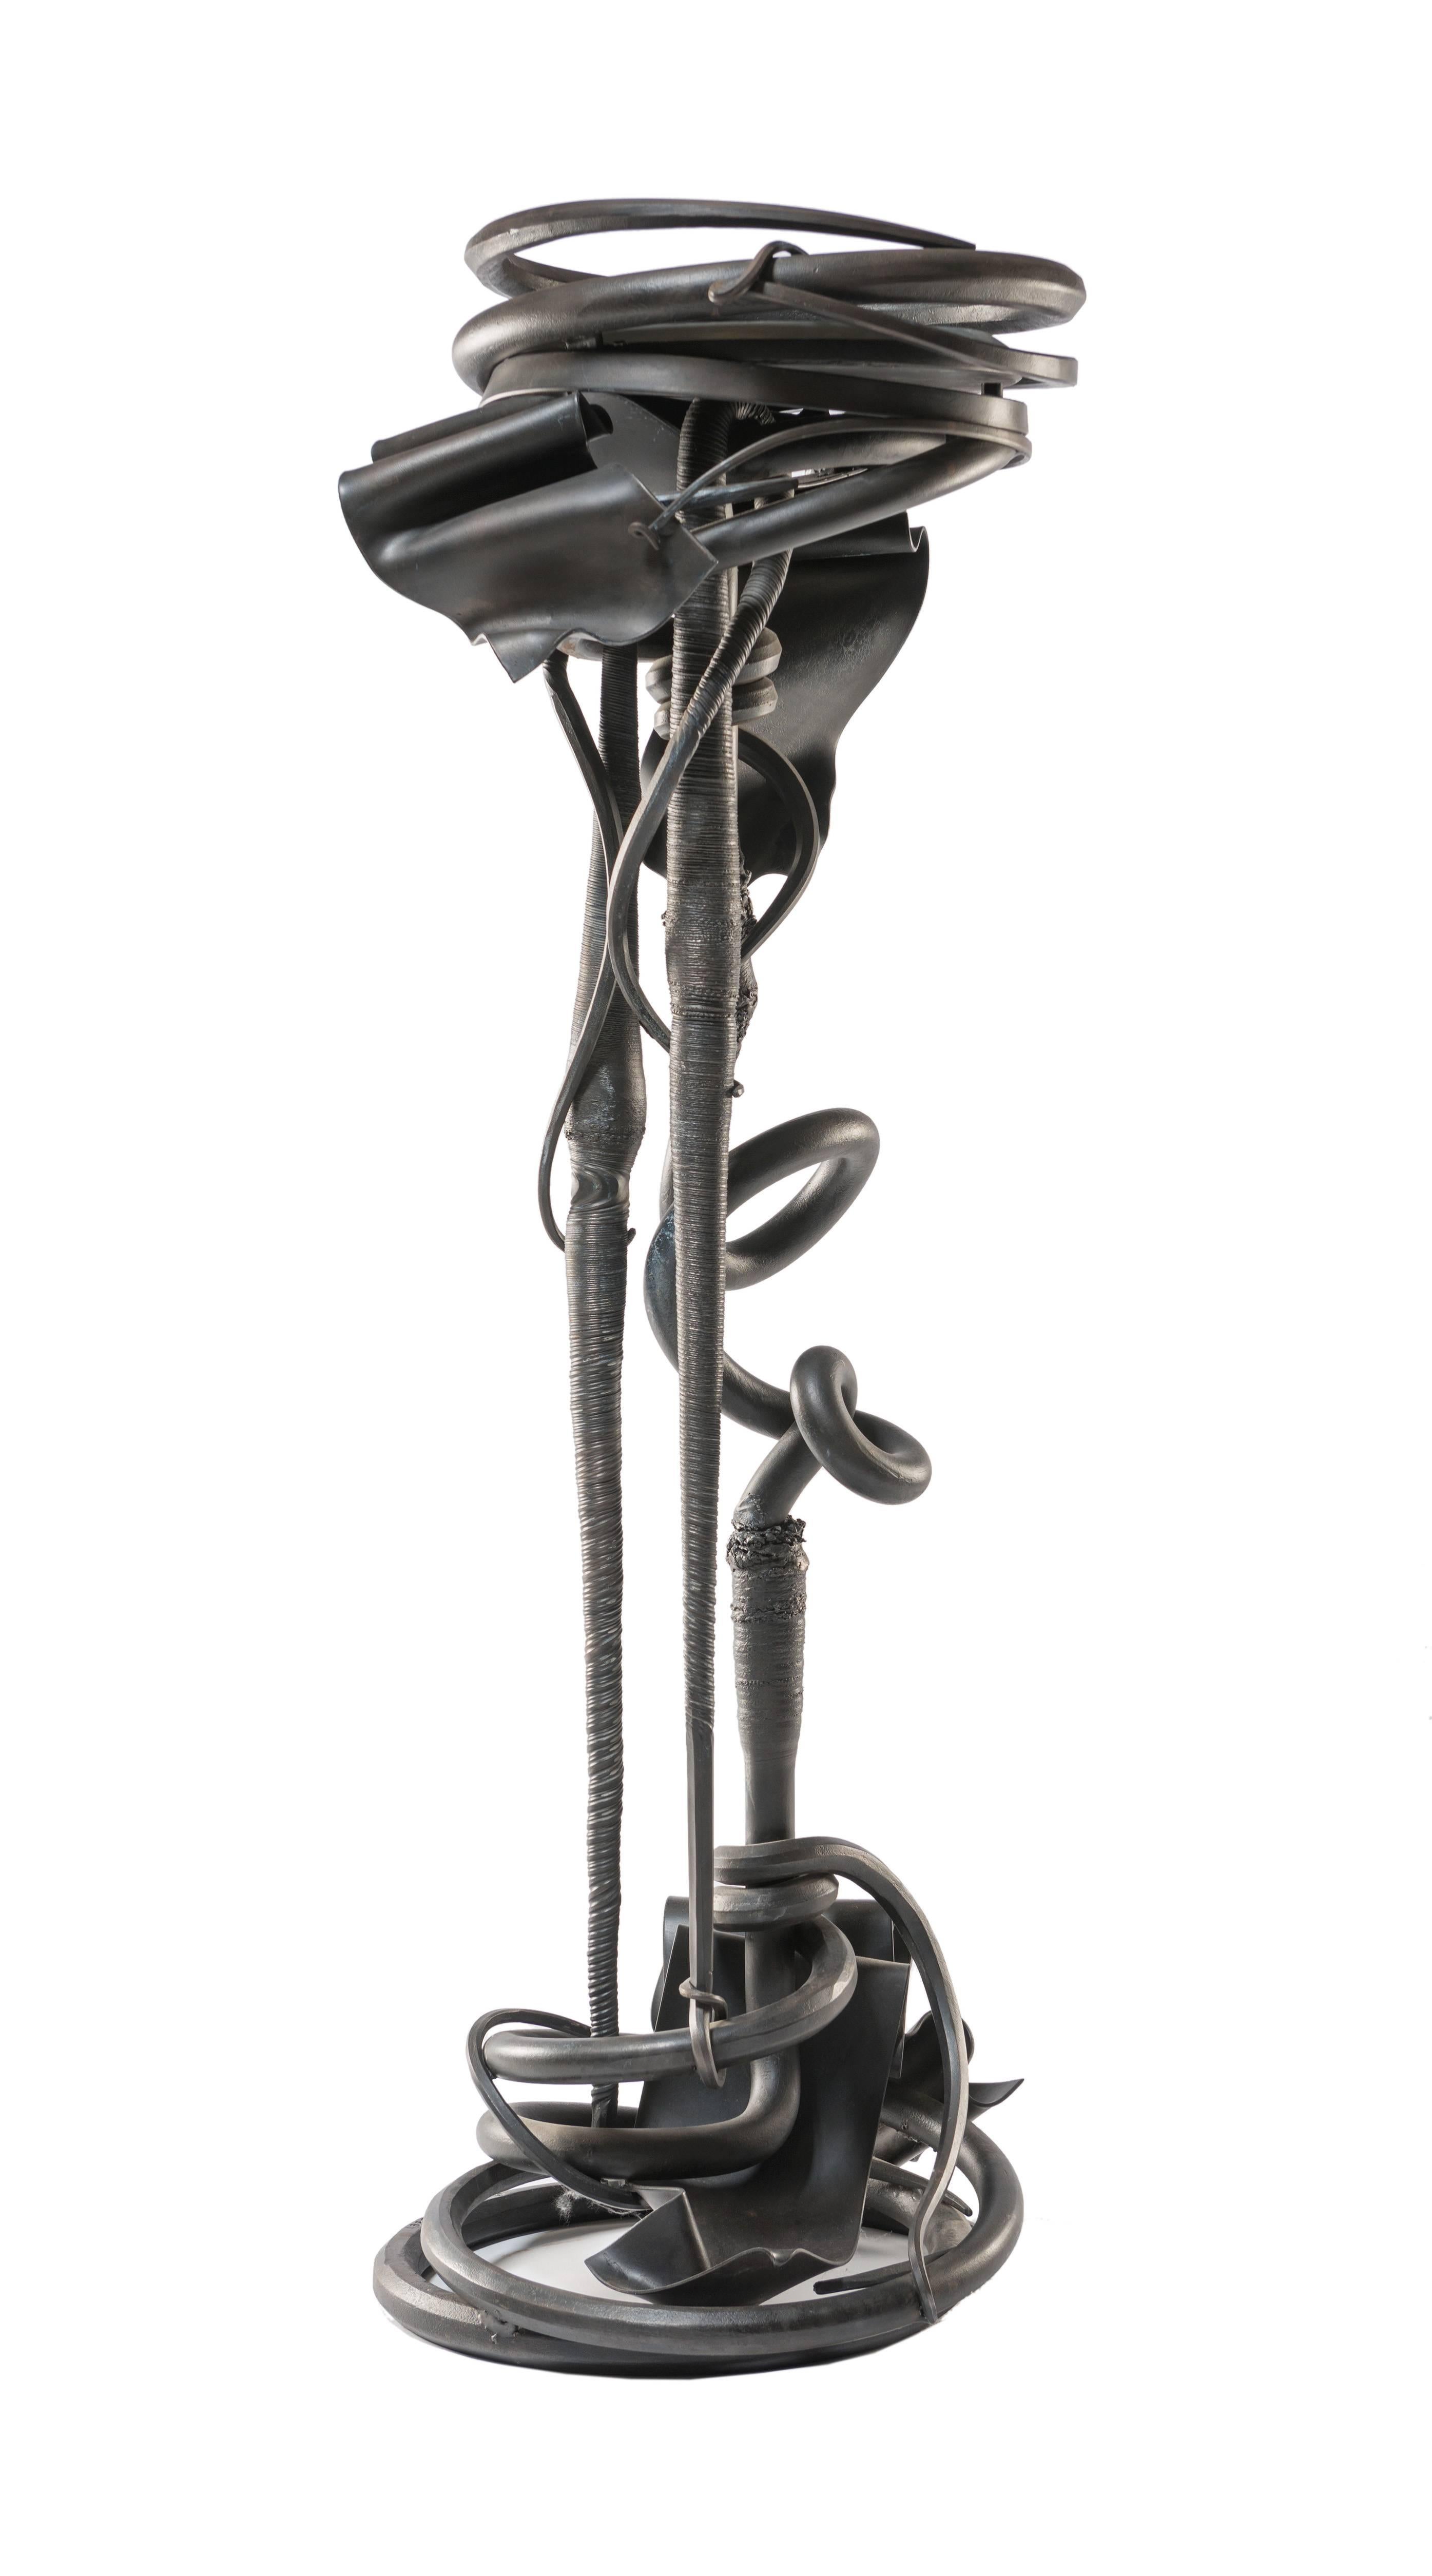 An excellent and early example of Albert Paley's work, this plant stand incorporates all of Paley's mastery of Ironwork. Includes original slate surface. Signed and dated 1989.